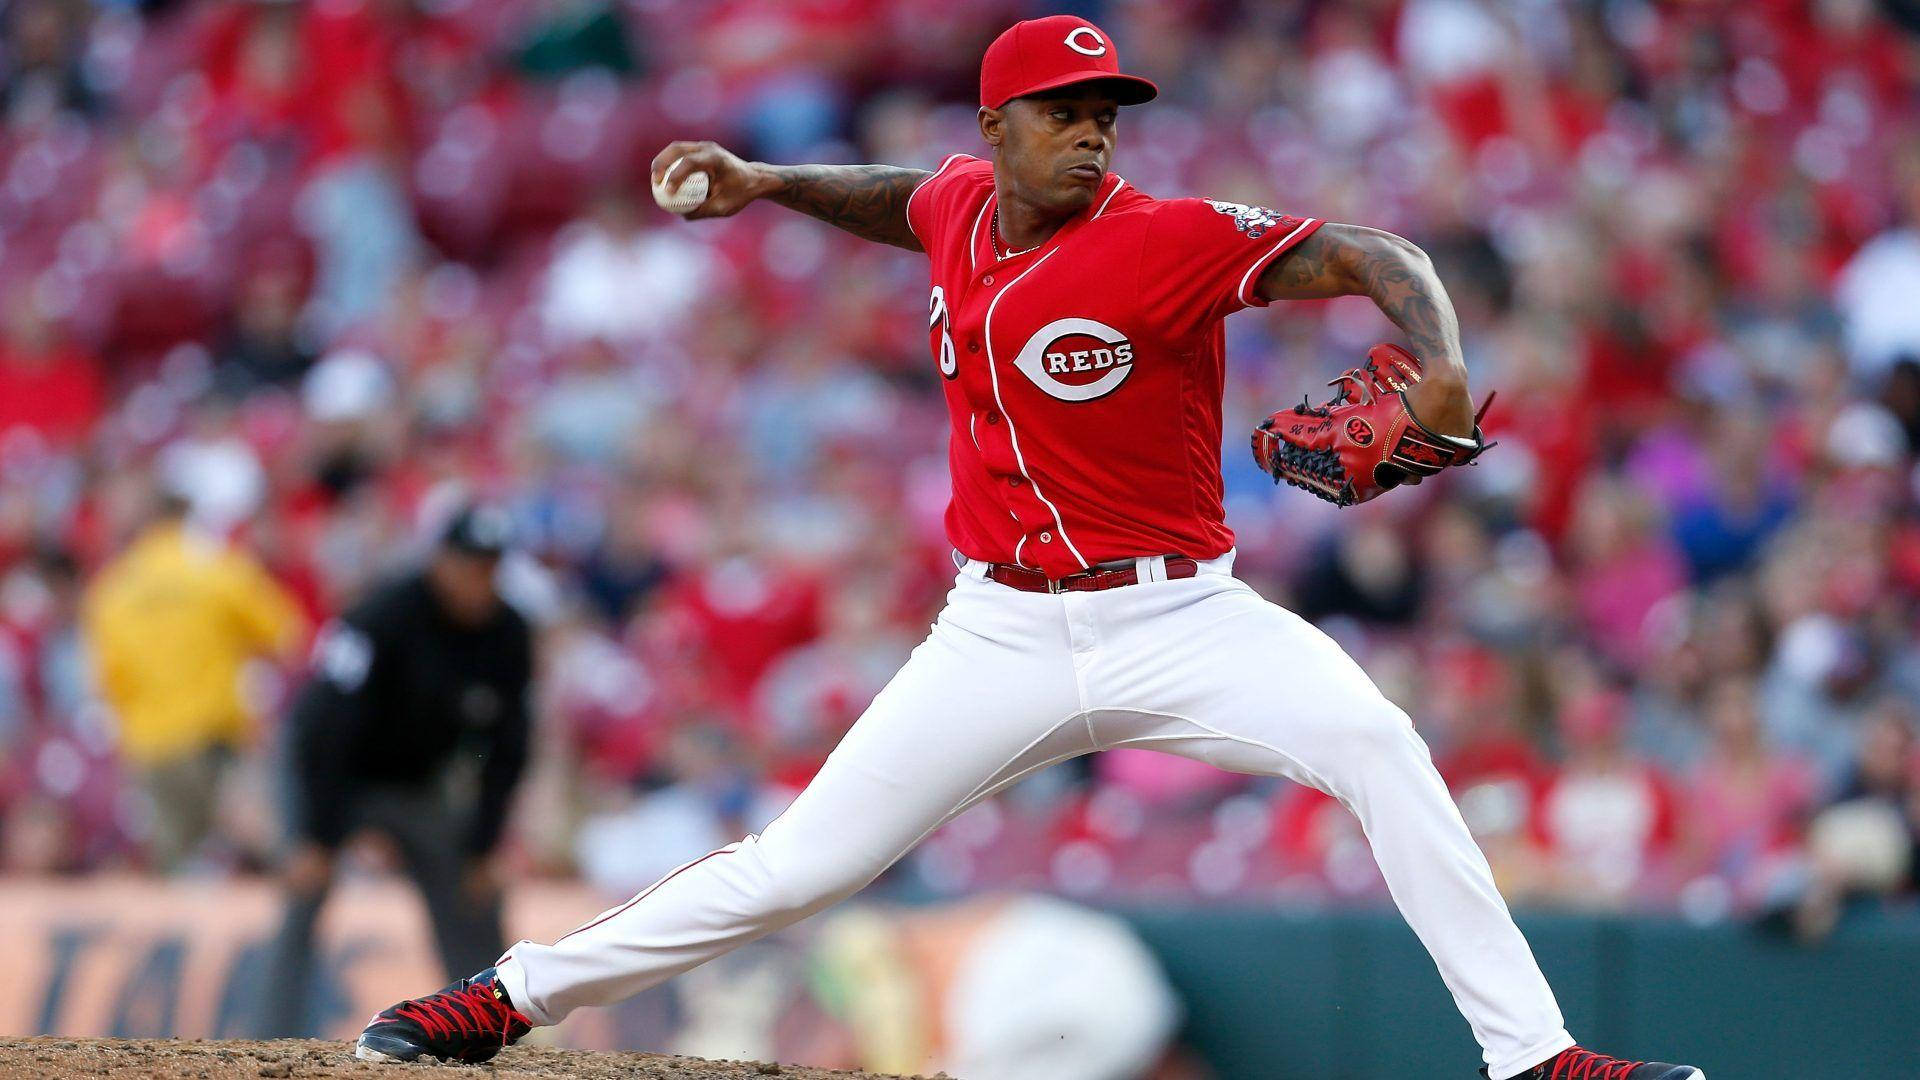 Raisel Iglesias In Action On The Pitch Wallpaper